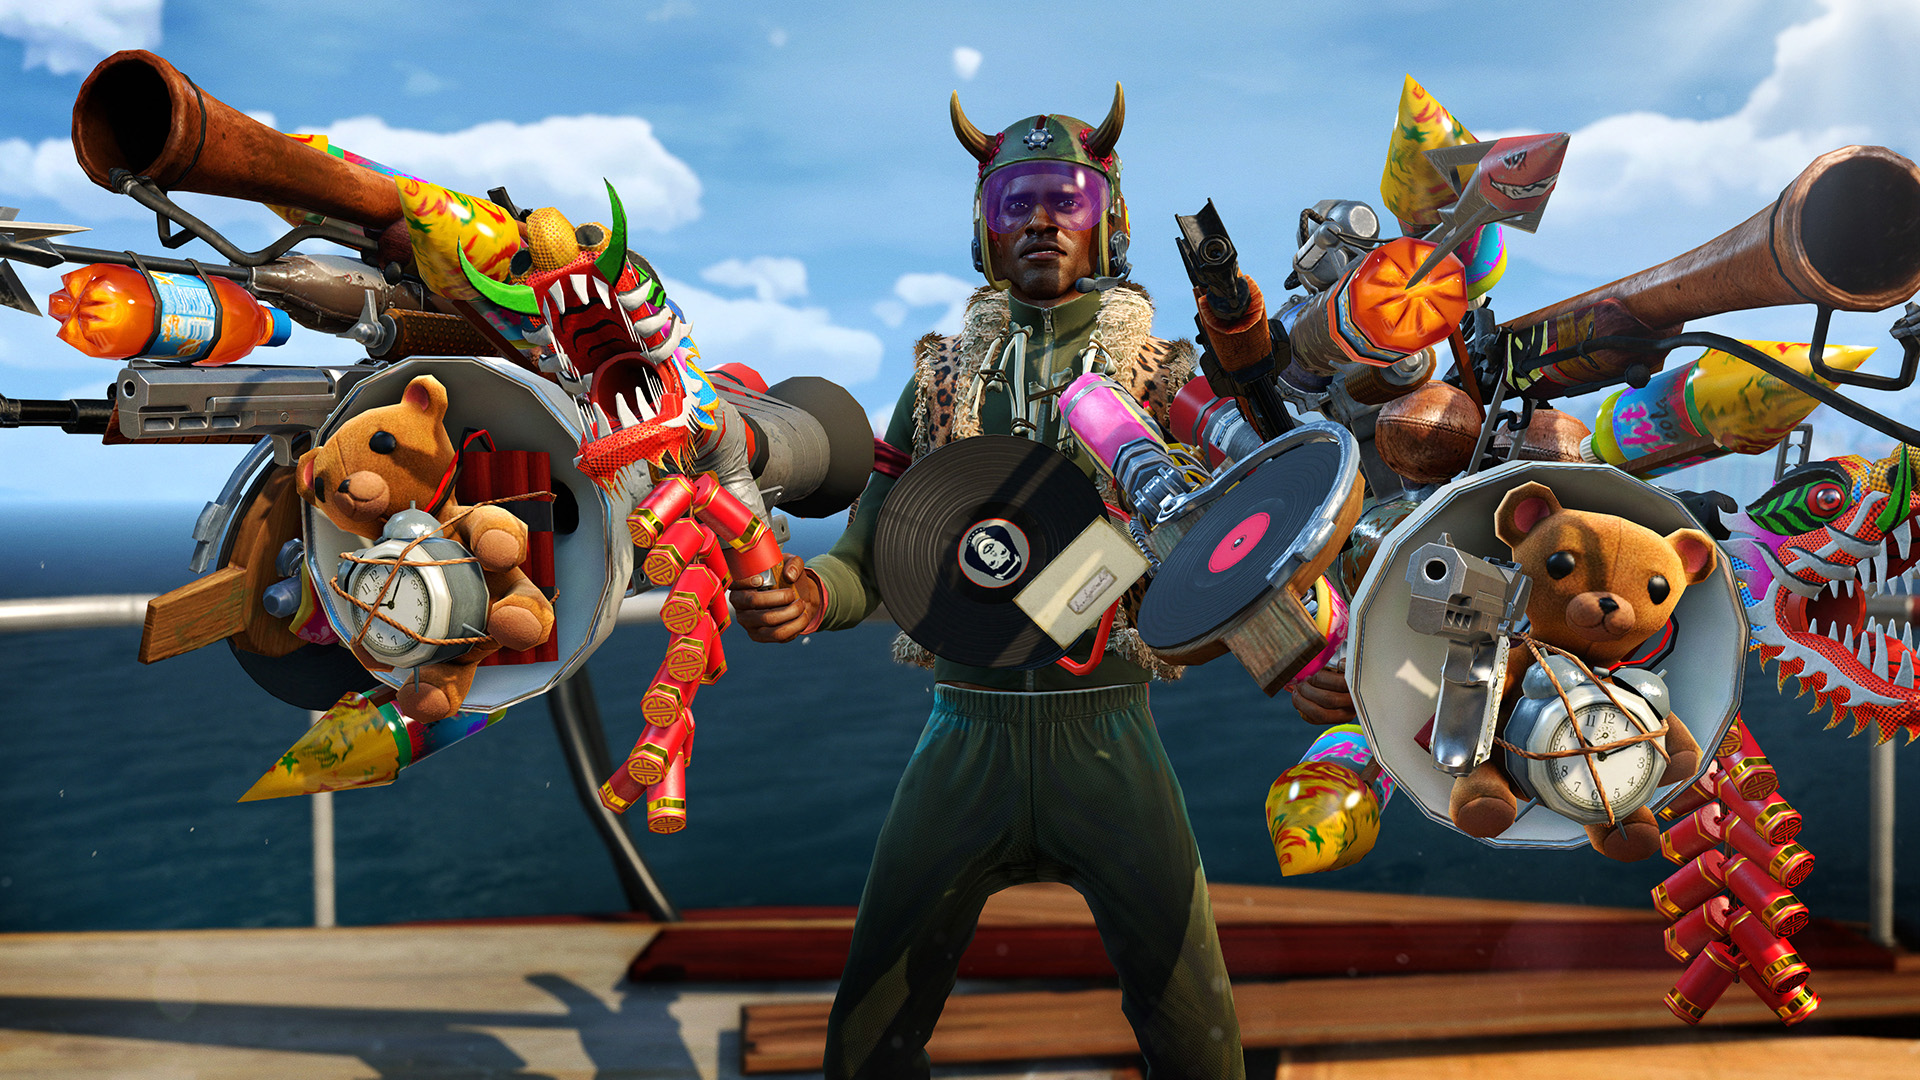 Co-Optimus - Review - Sunset Overdrive Co-Op Review